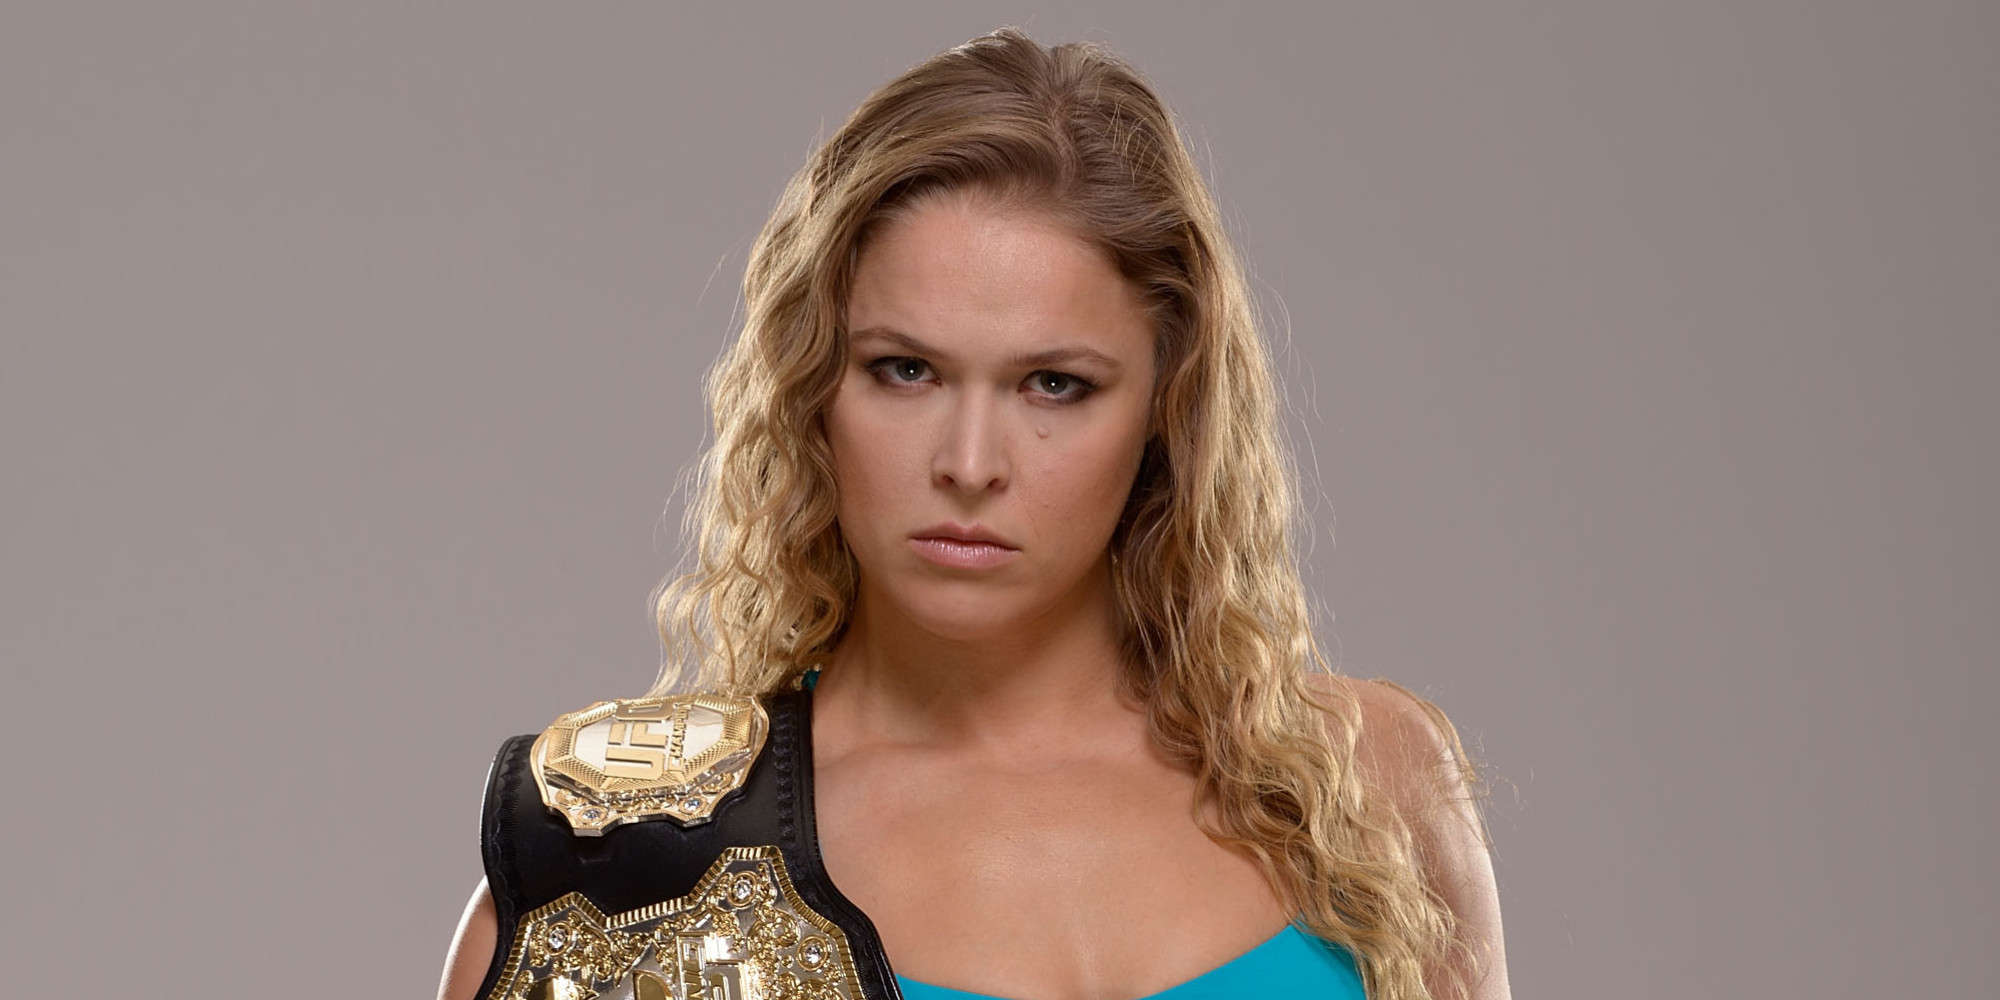 Wallpaper Ronda Rousey HD Upload At March By Adam